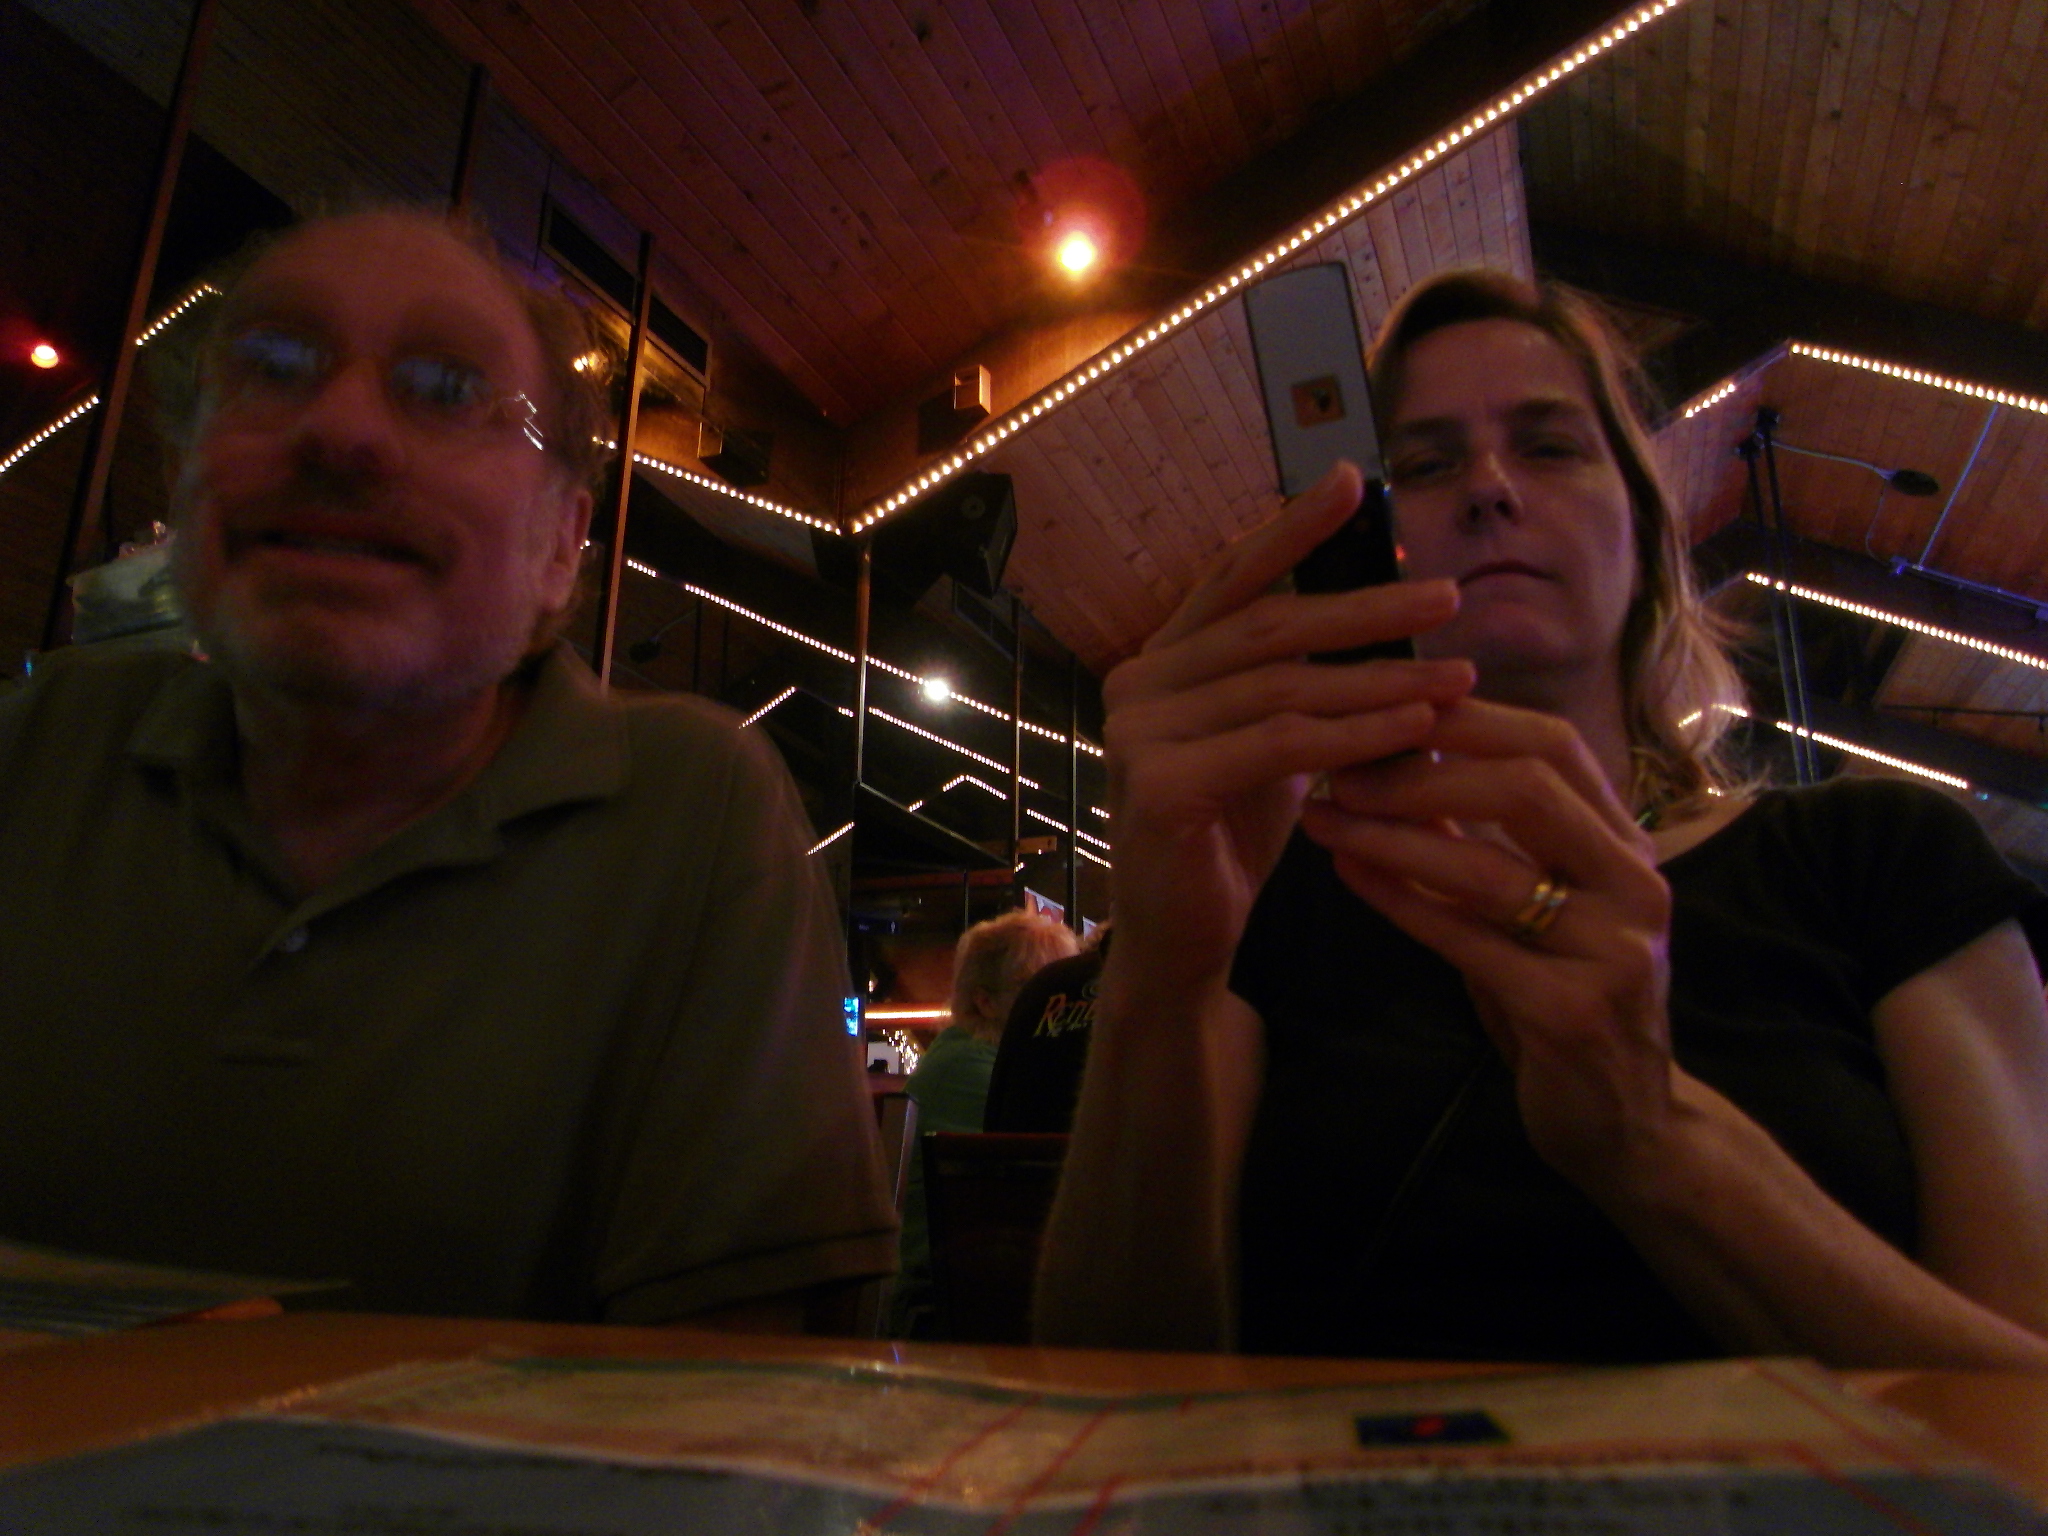 man and woman on cellphones in a bar